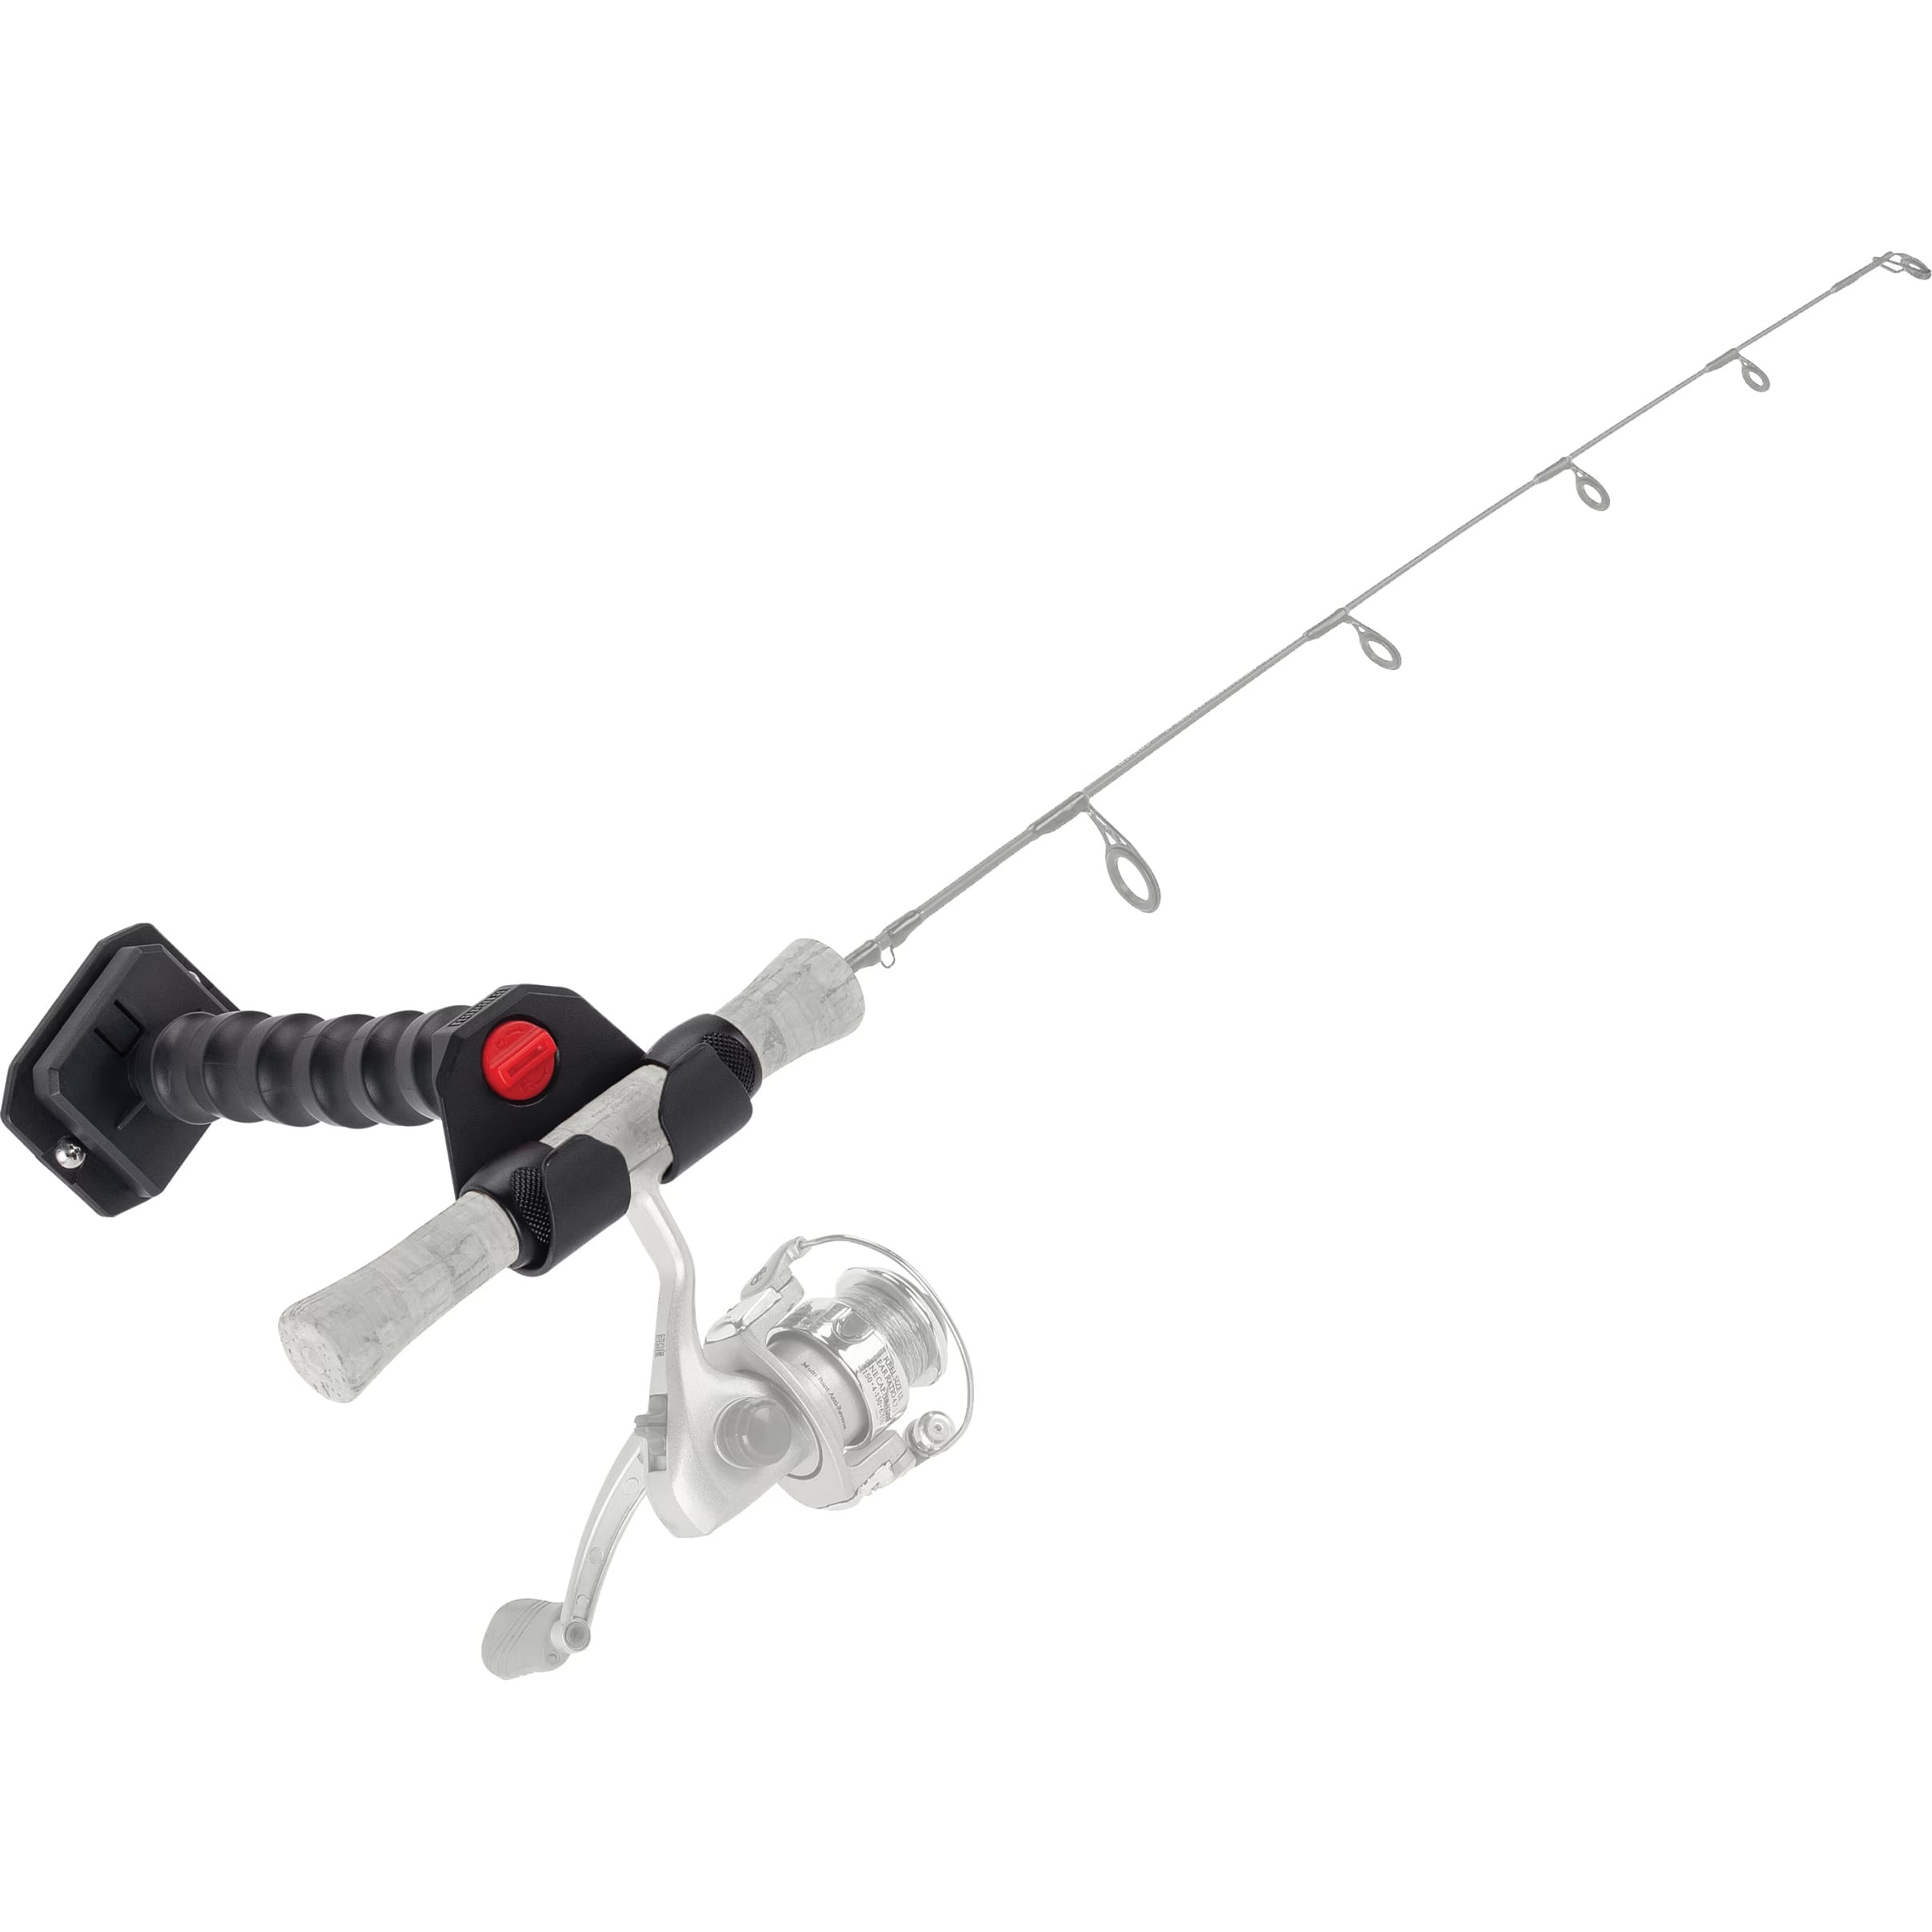 Rapala® Rod Holder with SmartHub™ Connector